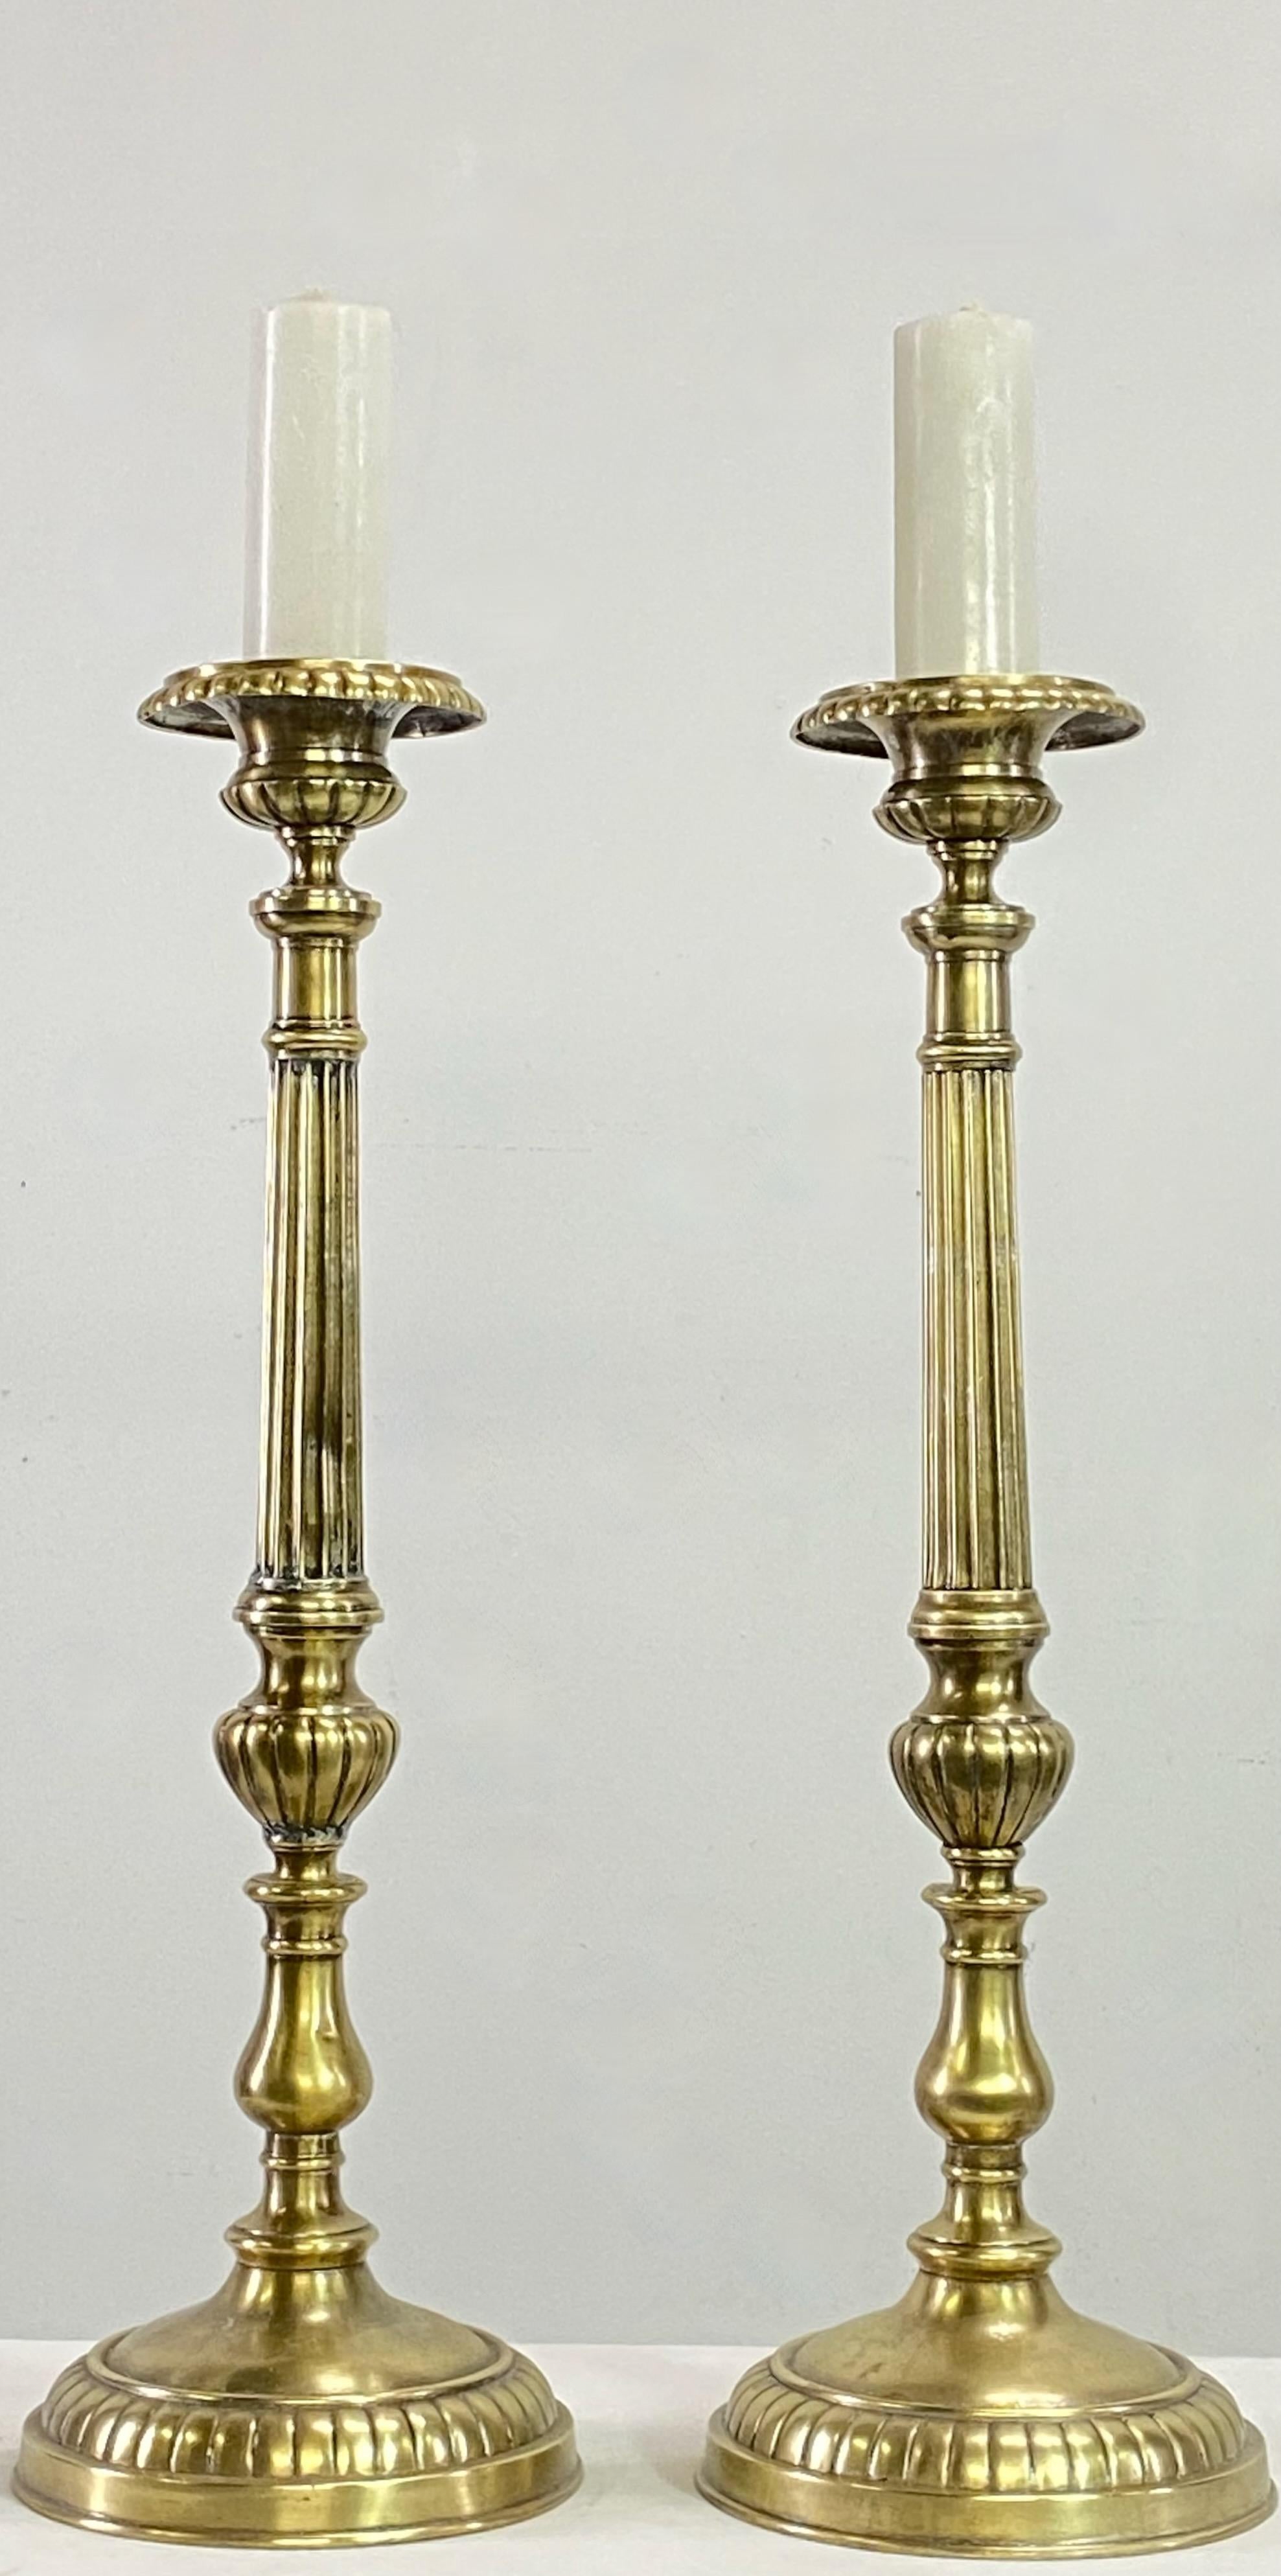 A pair of European brass candlesticks.
Spun, cast and hand chased brass, and were originally silver plated.
These had been electrified at one time and could easily be again if desired.
Having some expected light dents and signs of age, and minor